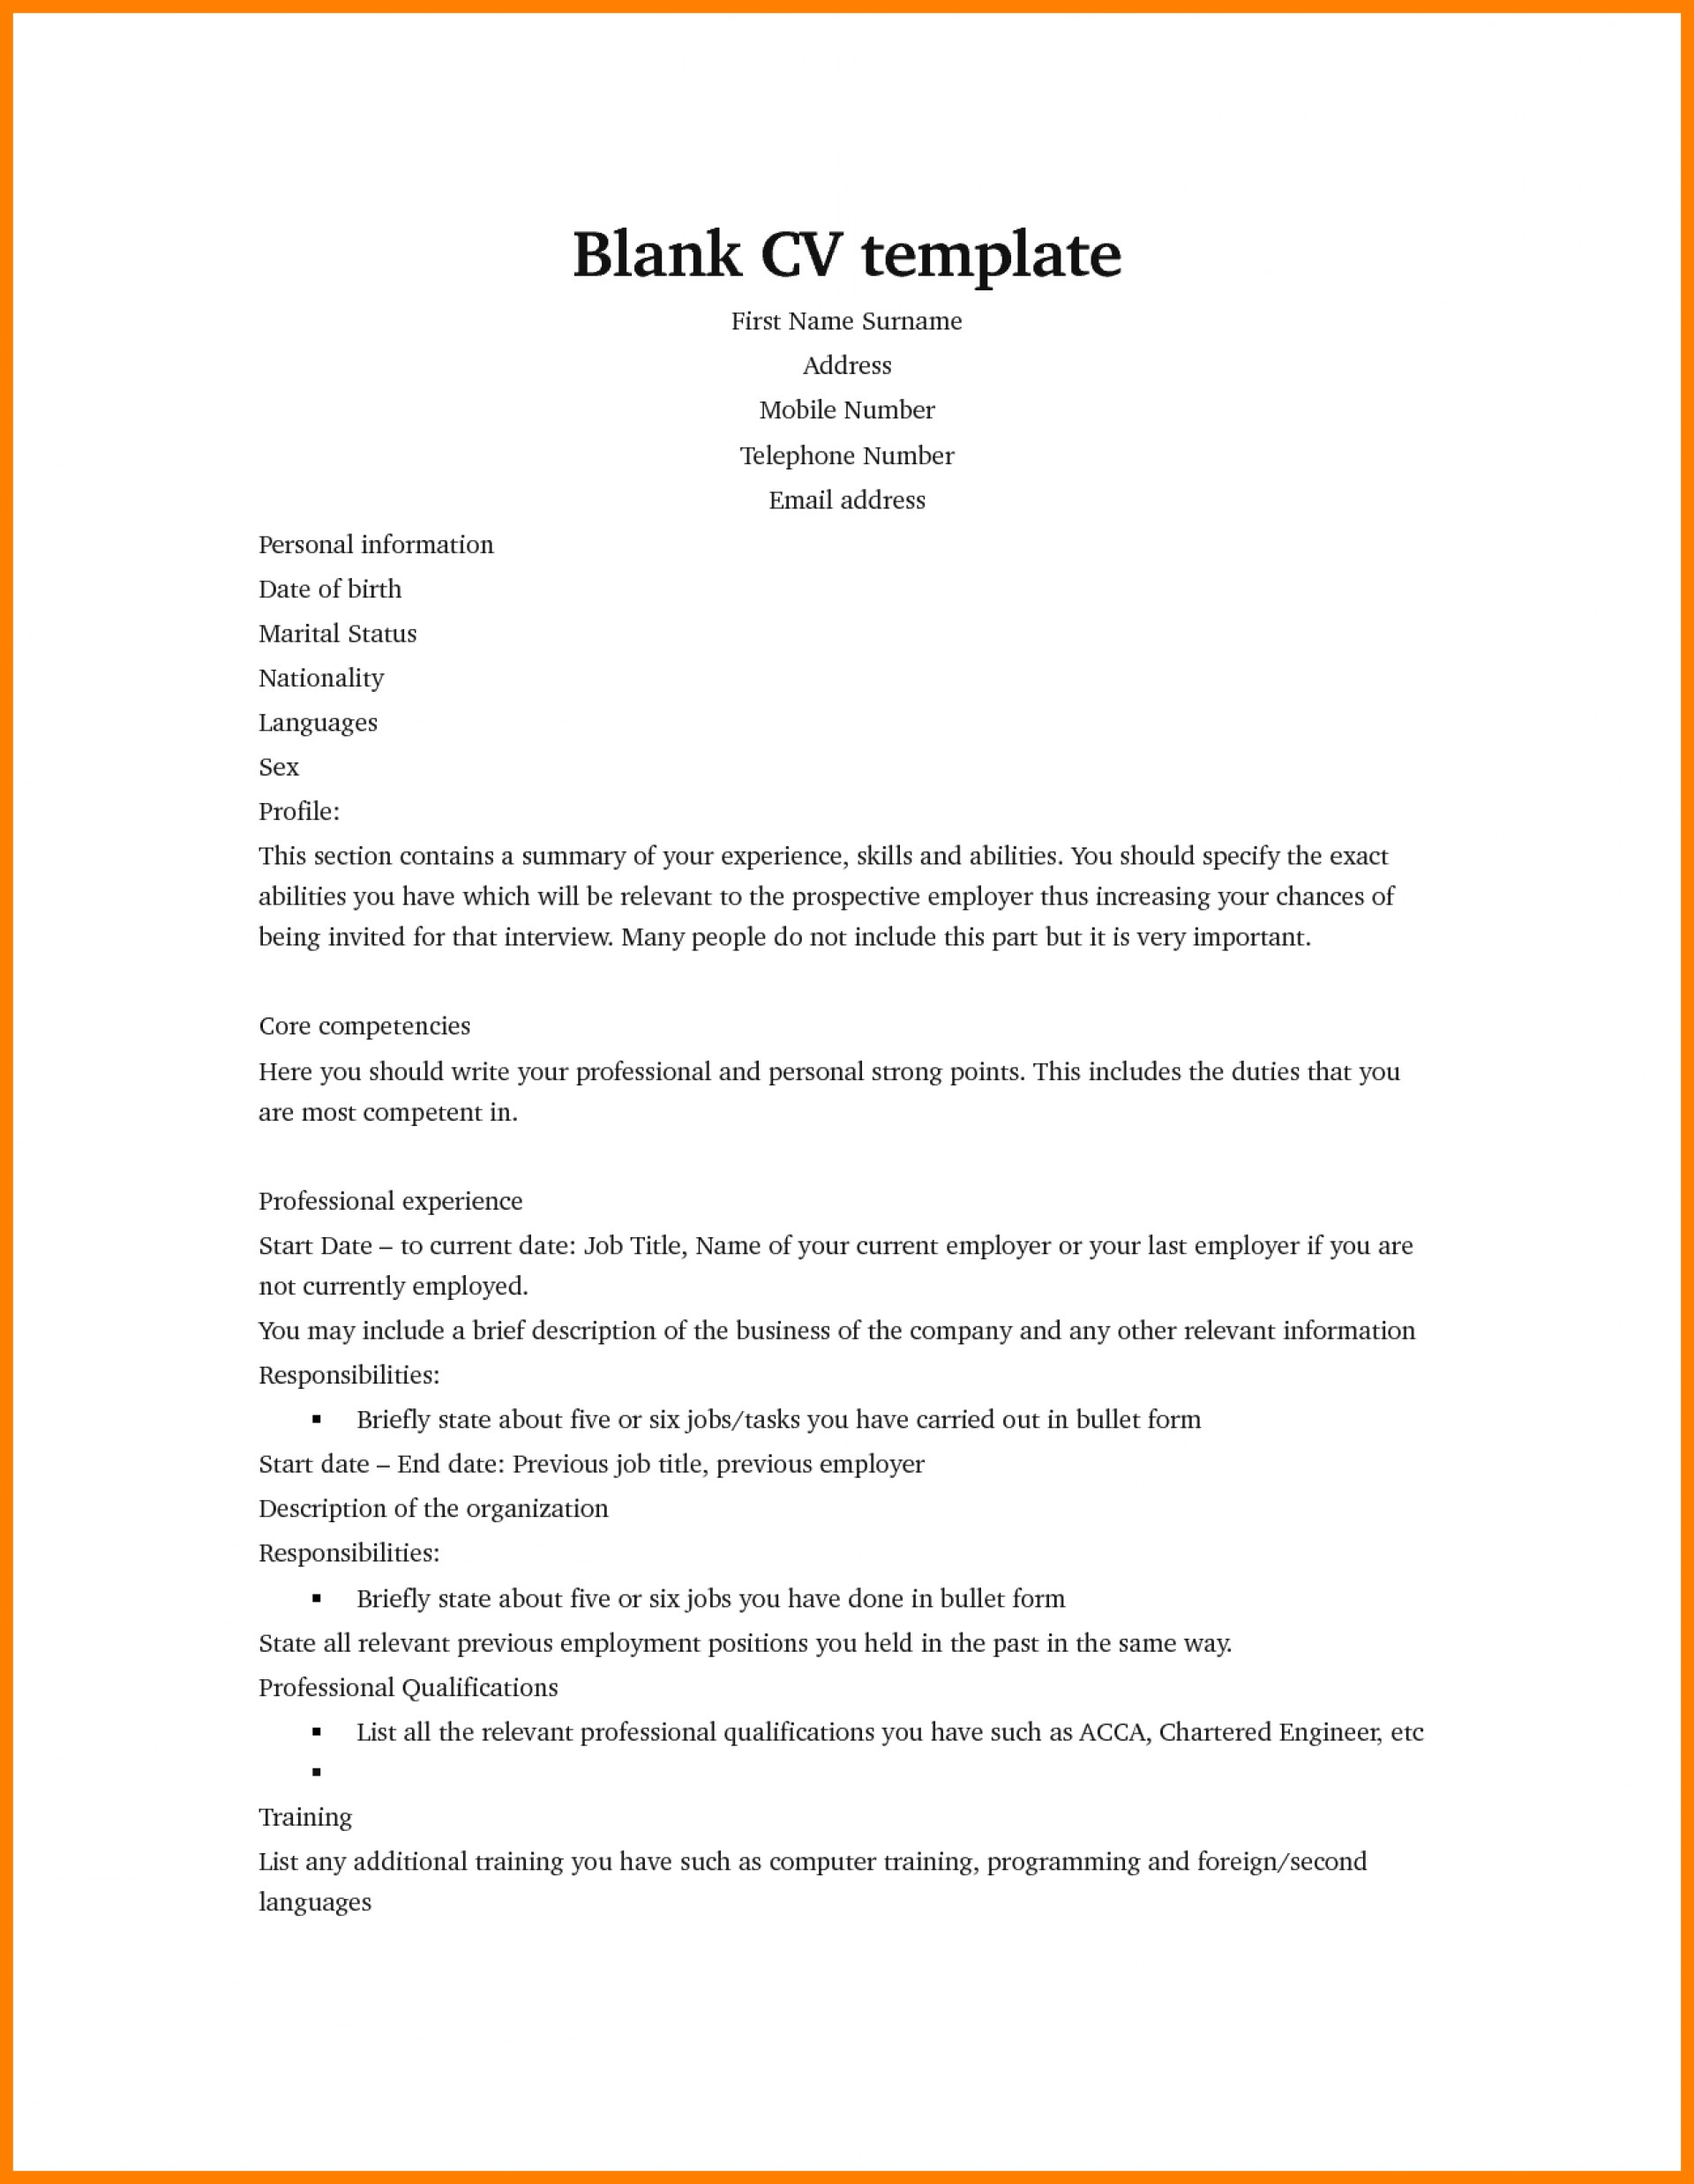 022 Free Resume Templates 019 Curriculum Vitae Template Throughout Free Blank Cv Template Download